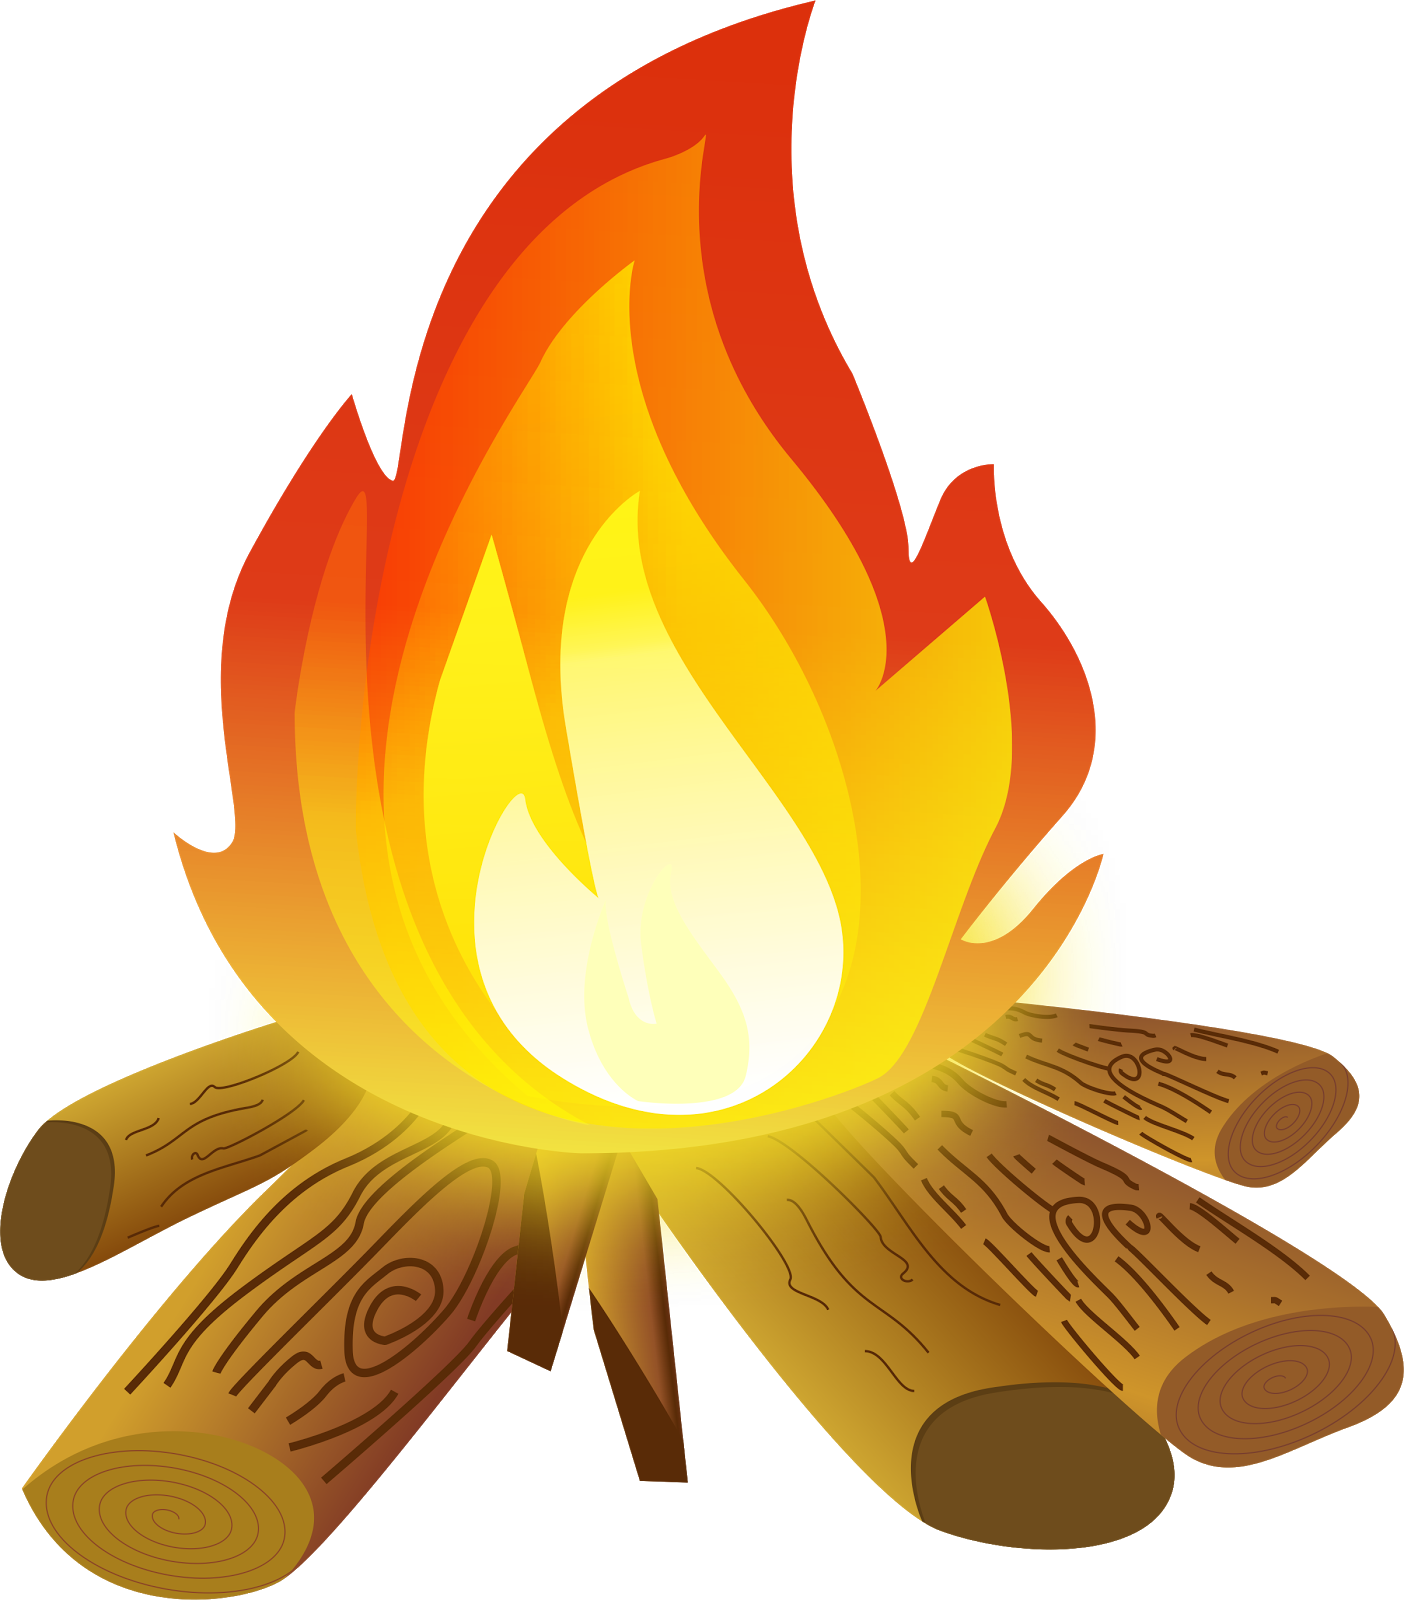 Campfire Graphic Illustration PNG image